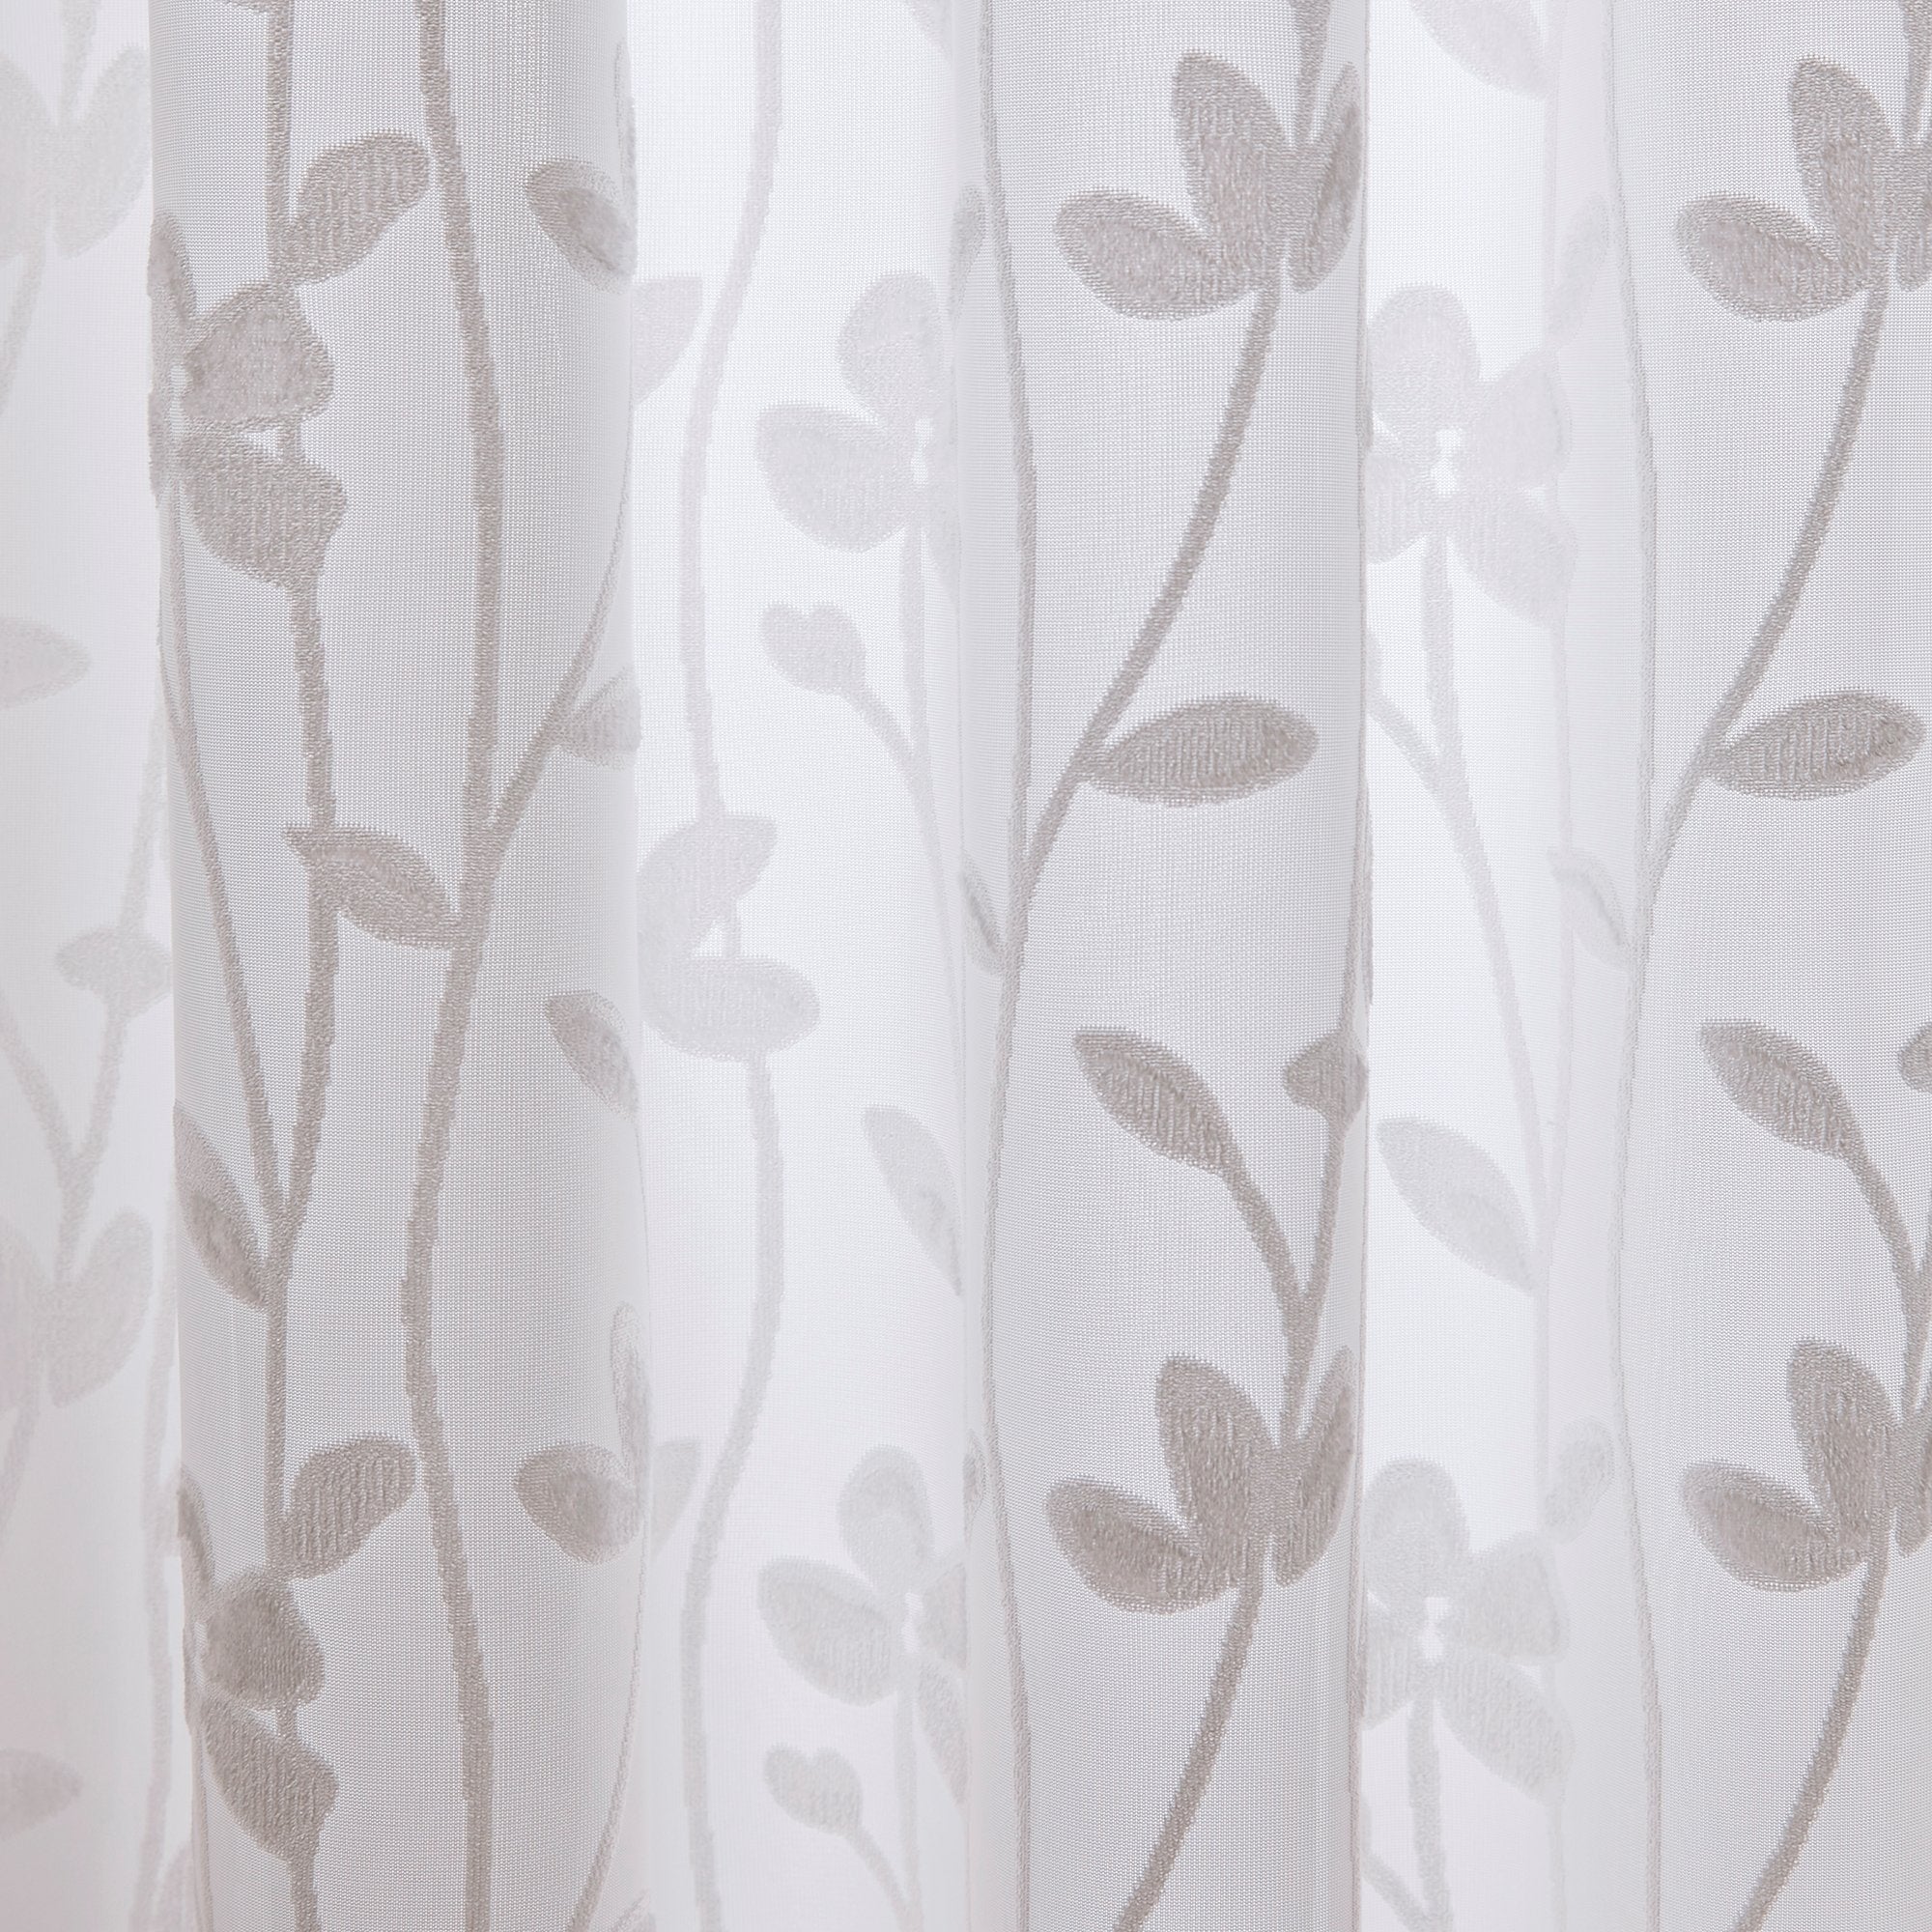 Pair of Pencil Pleat Curtains Sophia by Dreams & Drapes Curtains in Ivory